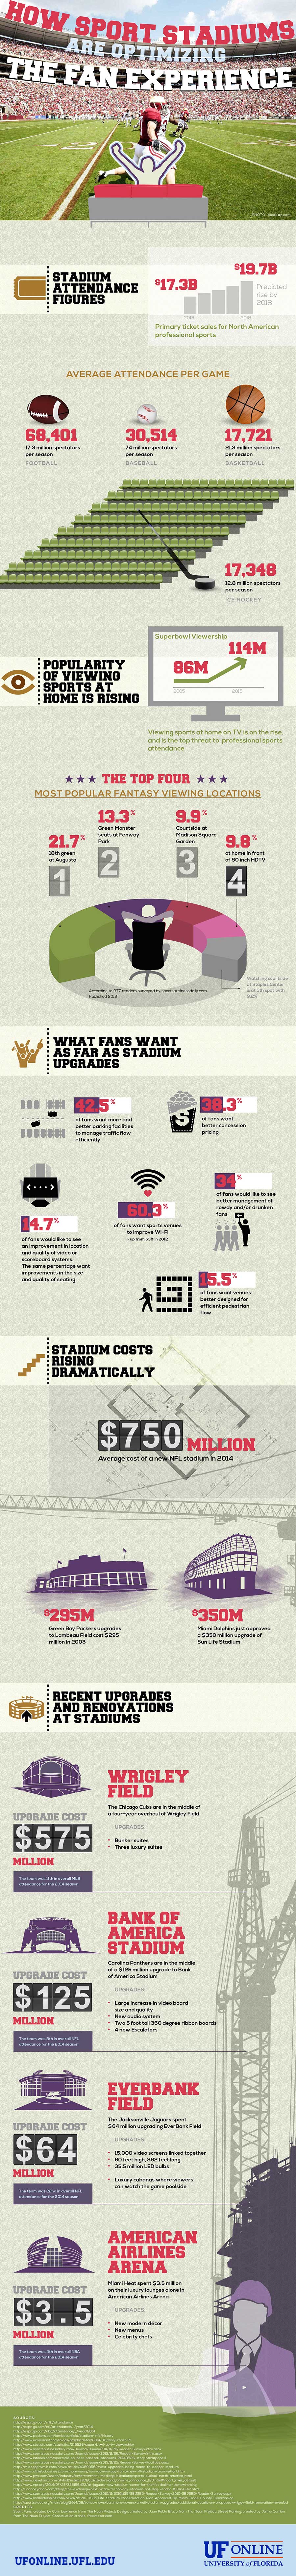 UF Online Infographic: How Sport Stadiums are Optimizing the Fan Experience